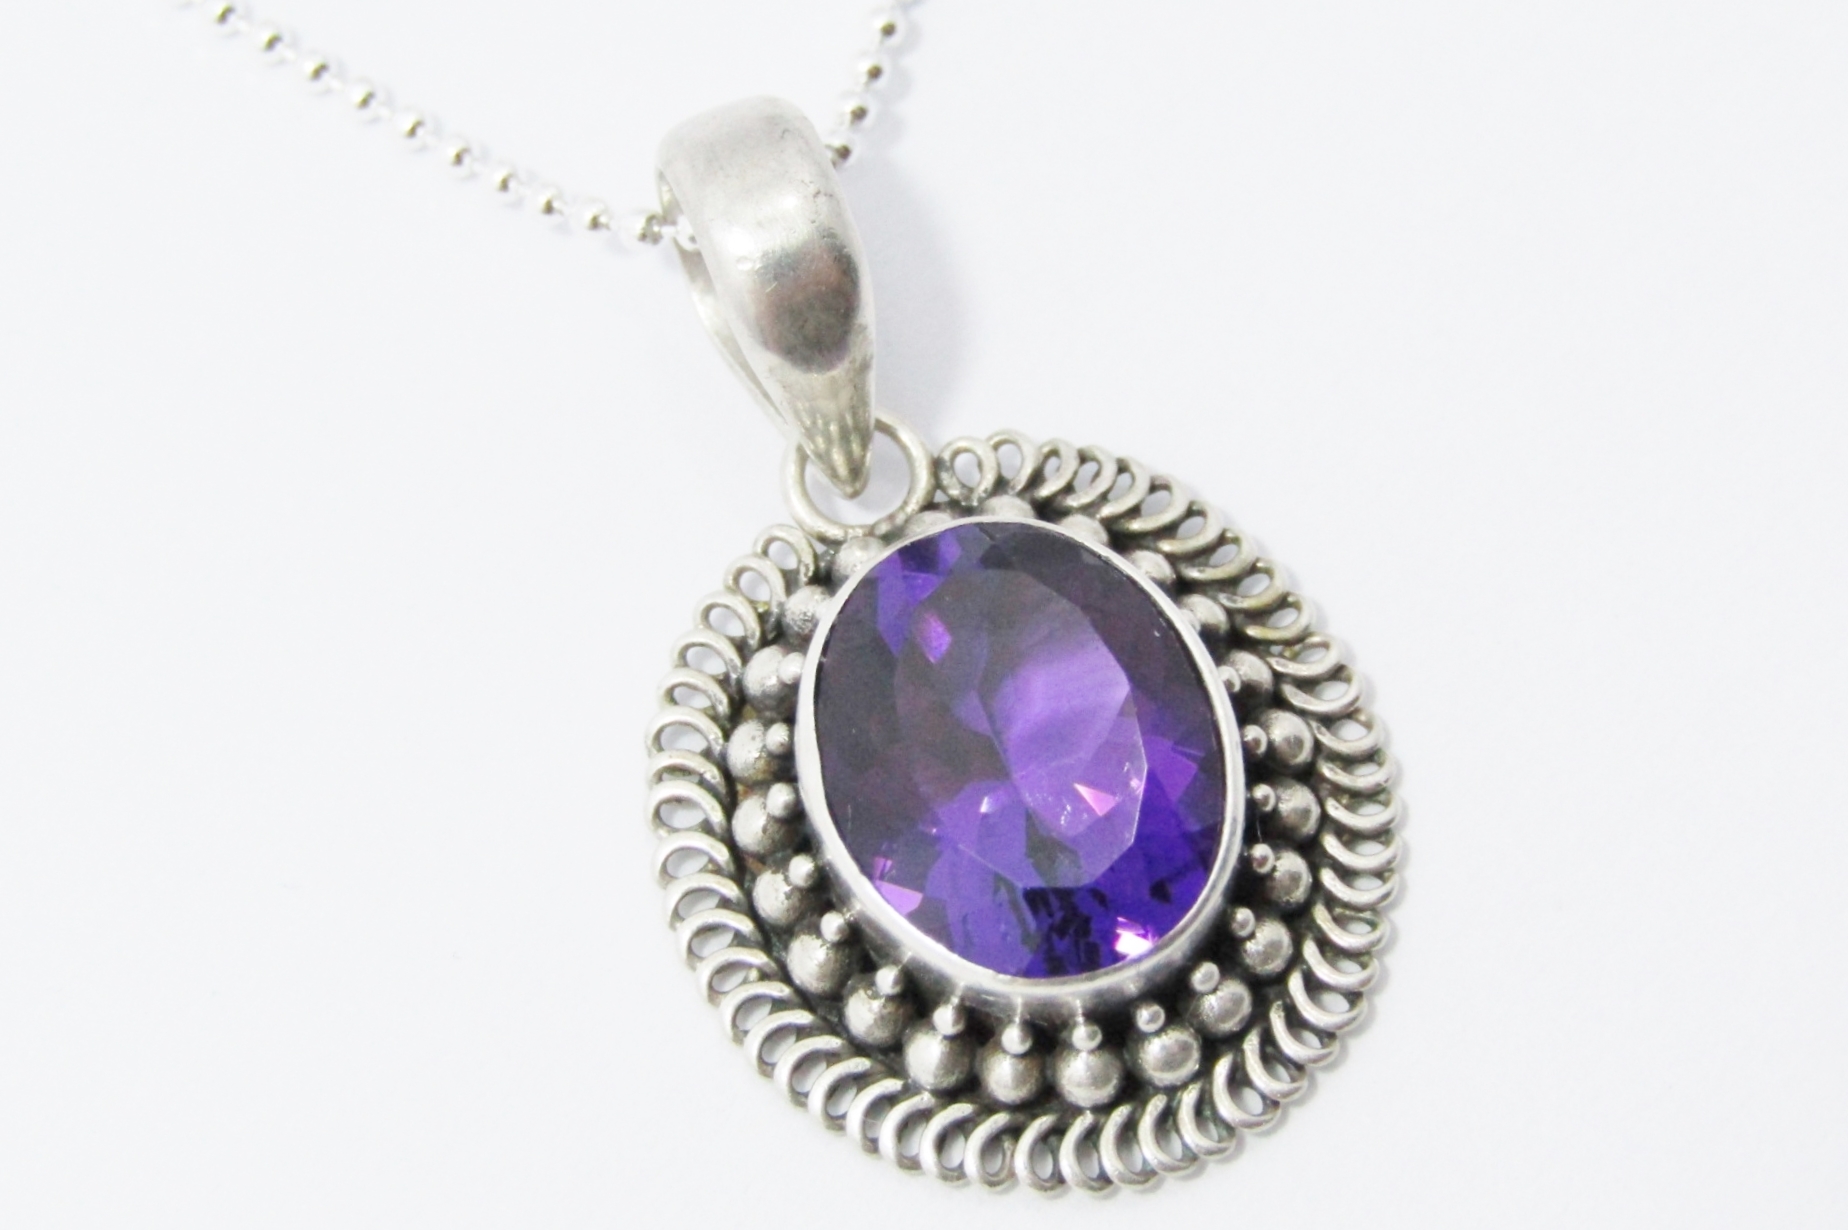 A Stunning Oval Amethyst Pendant On Chain in Sterling Silver.